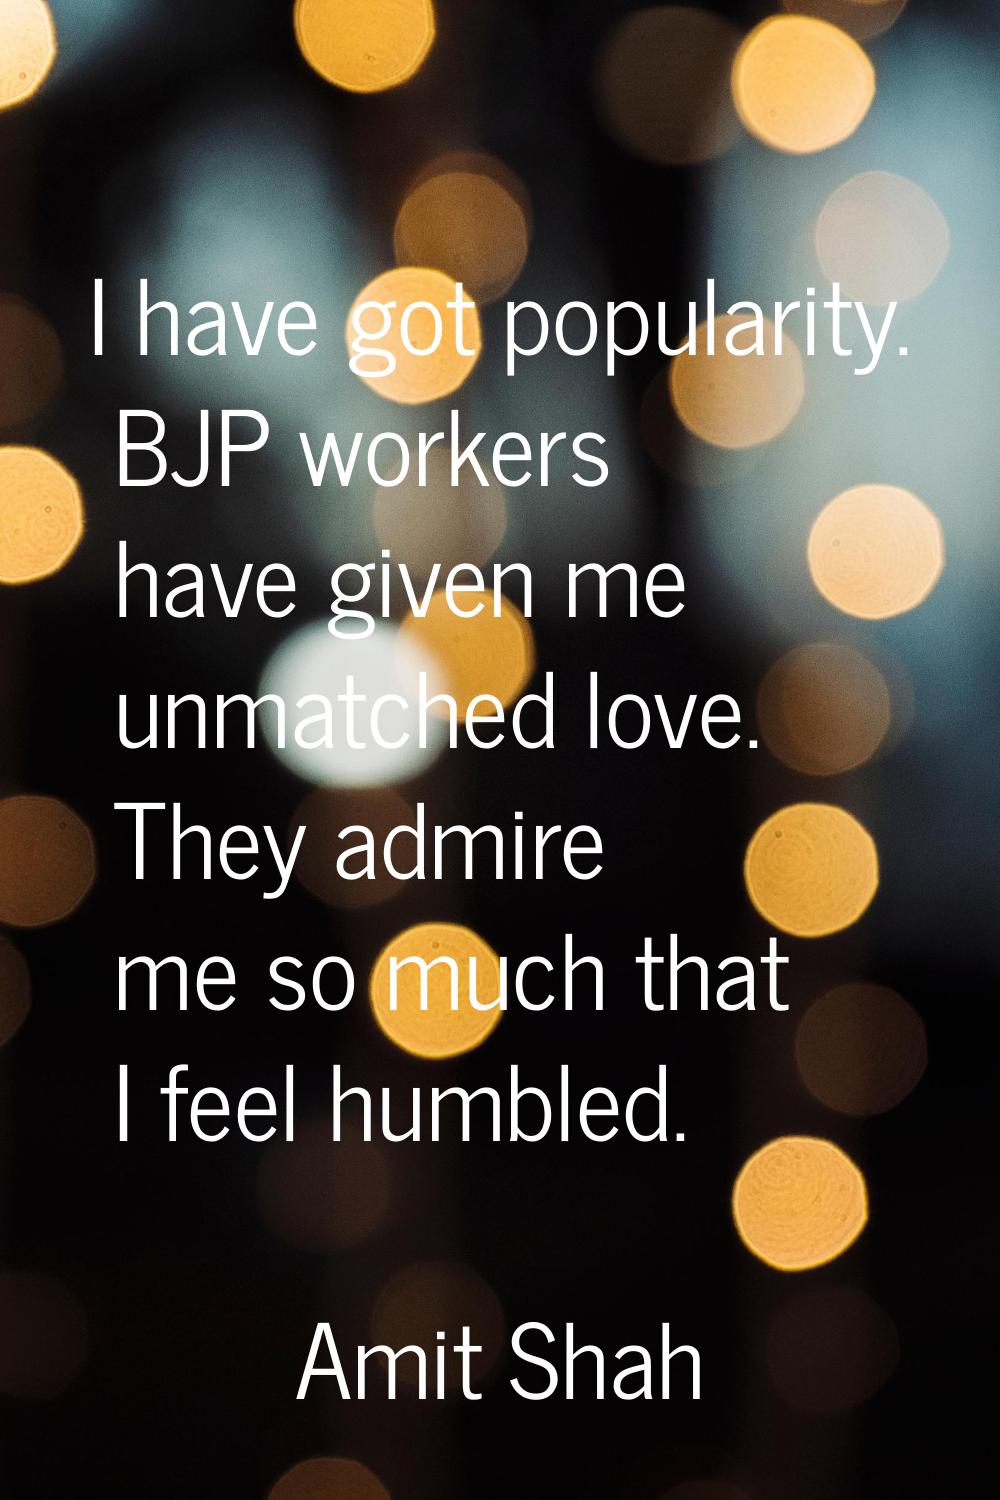 I have got popularity. BJP workers have given me unmatched love. They admire me so much that I feel